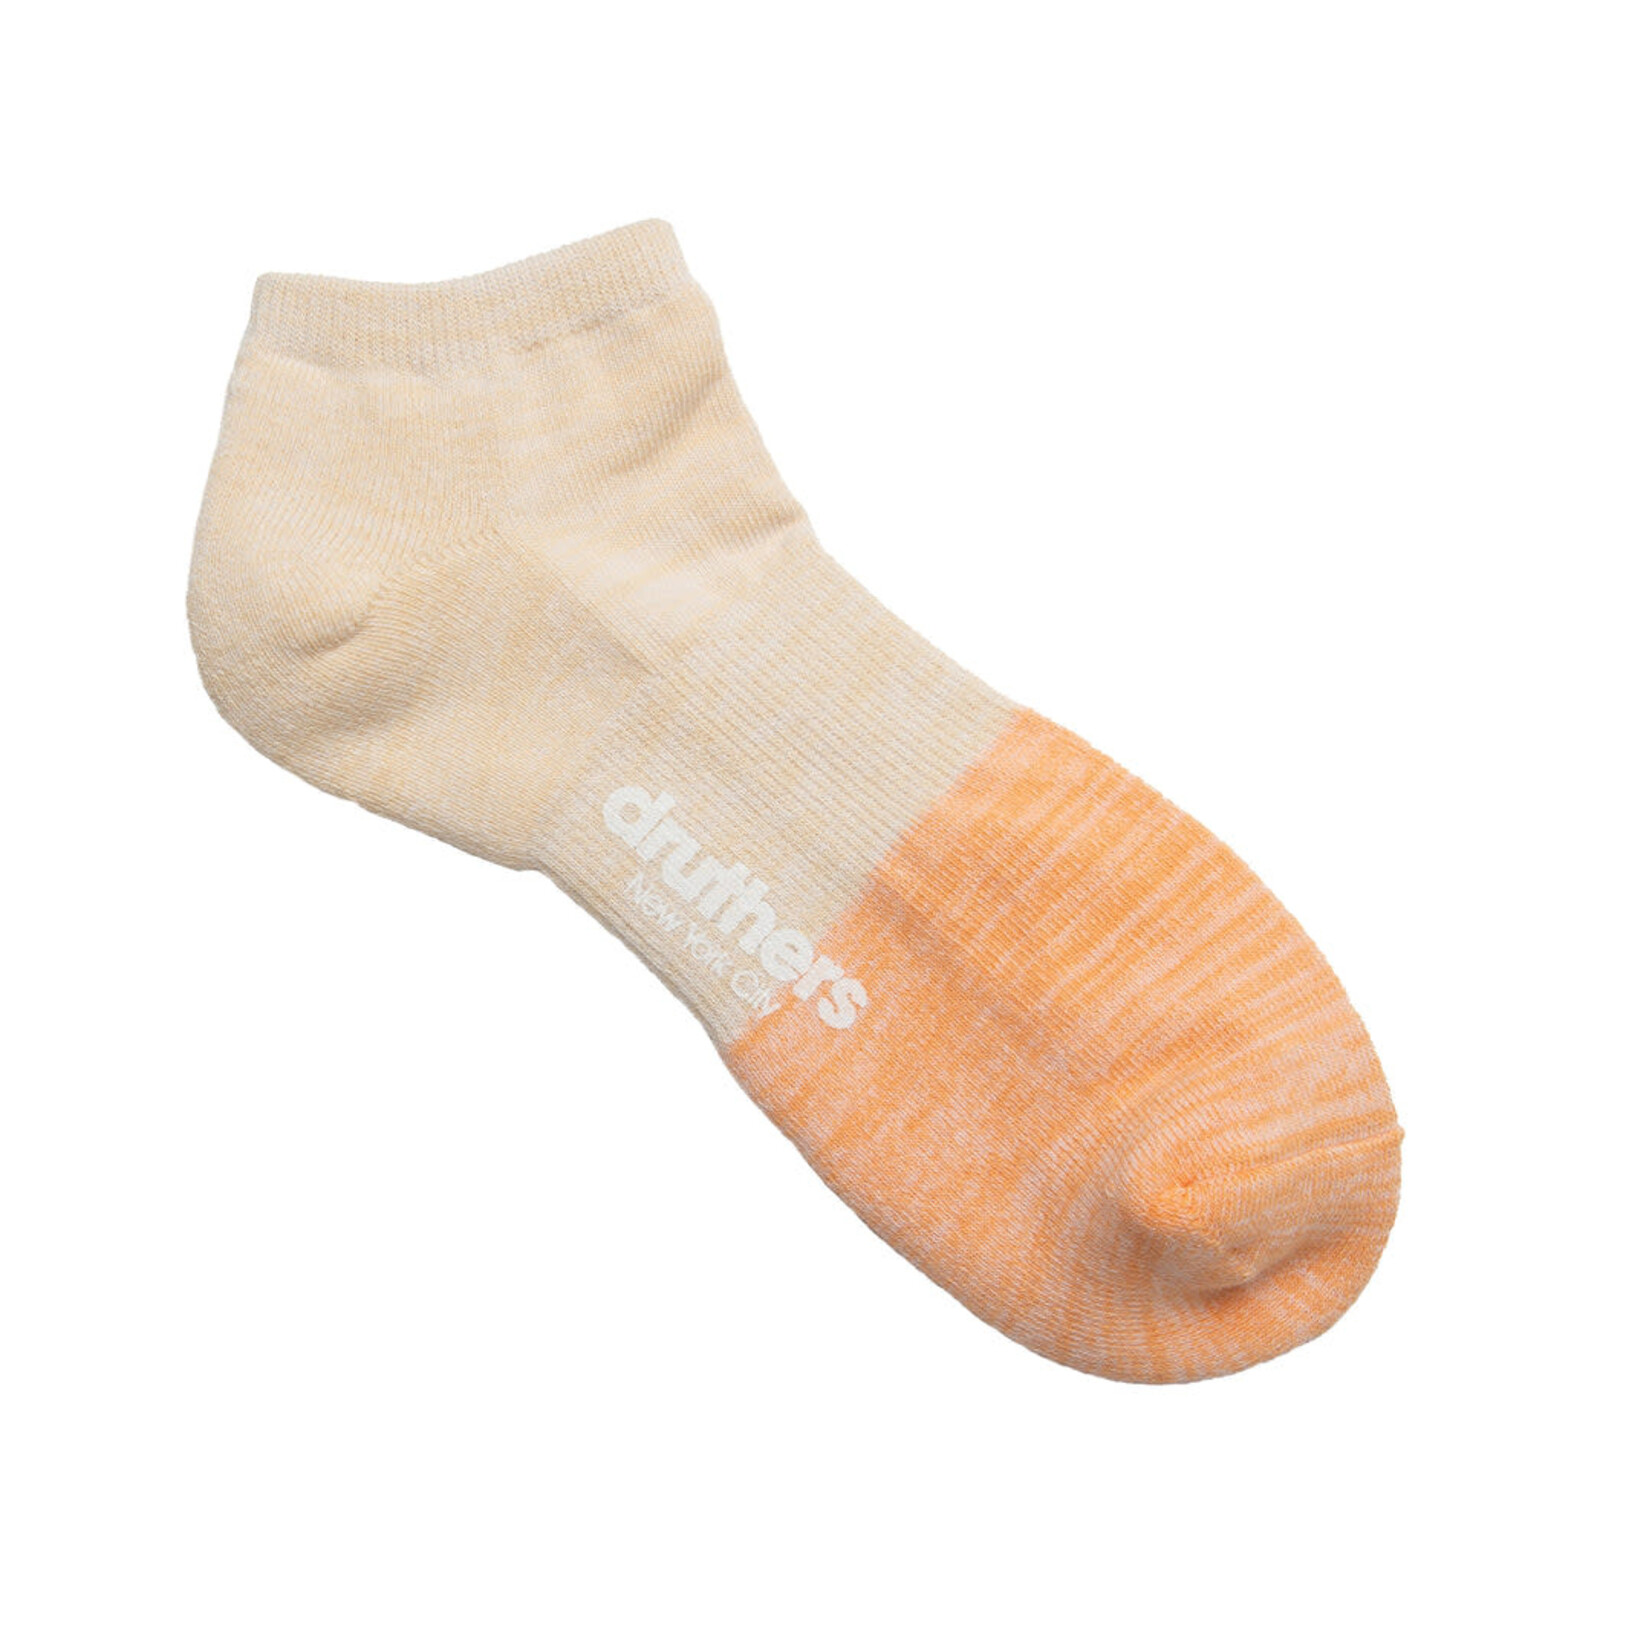 Druthers NYC Druthers Organic Cotton Everyday Blocked Ankle Sock Creamsicle